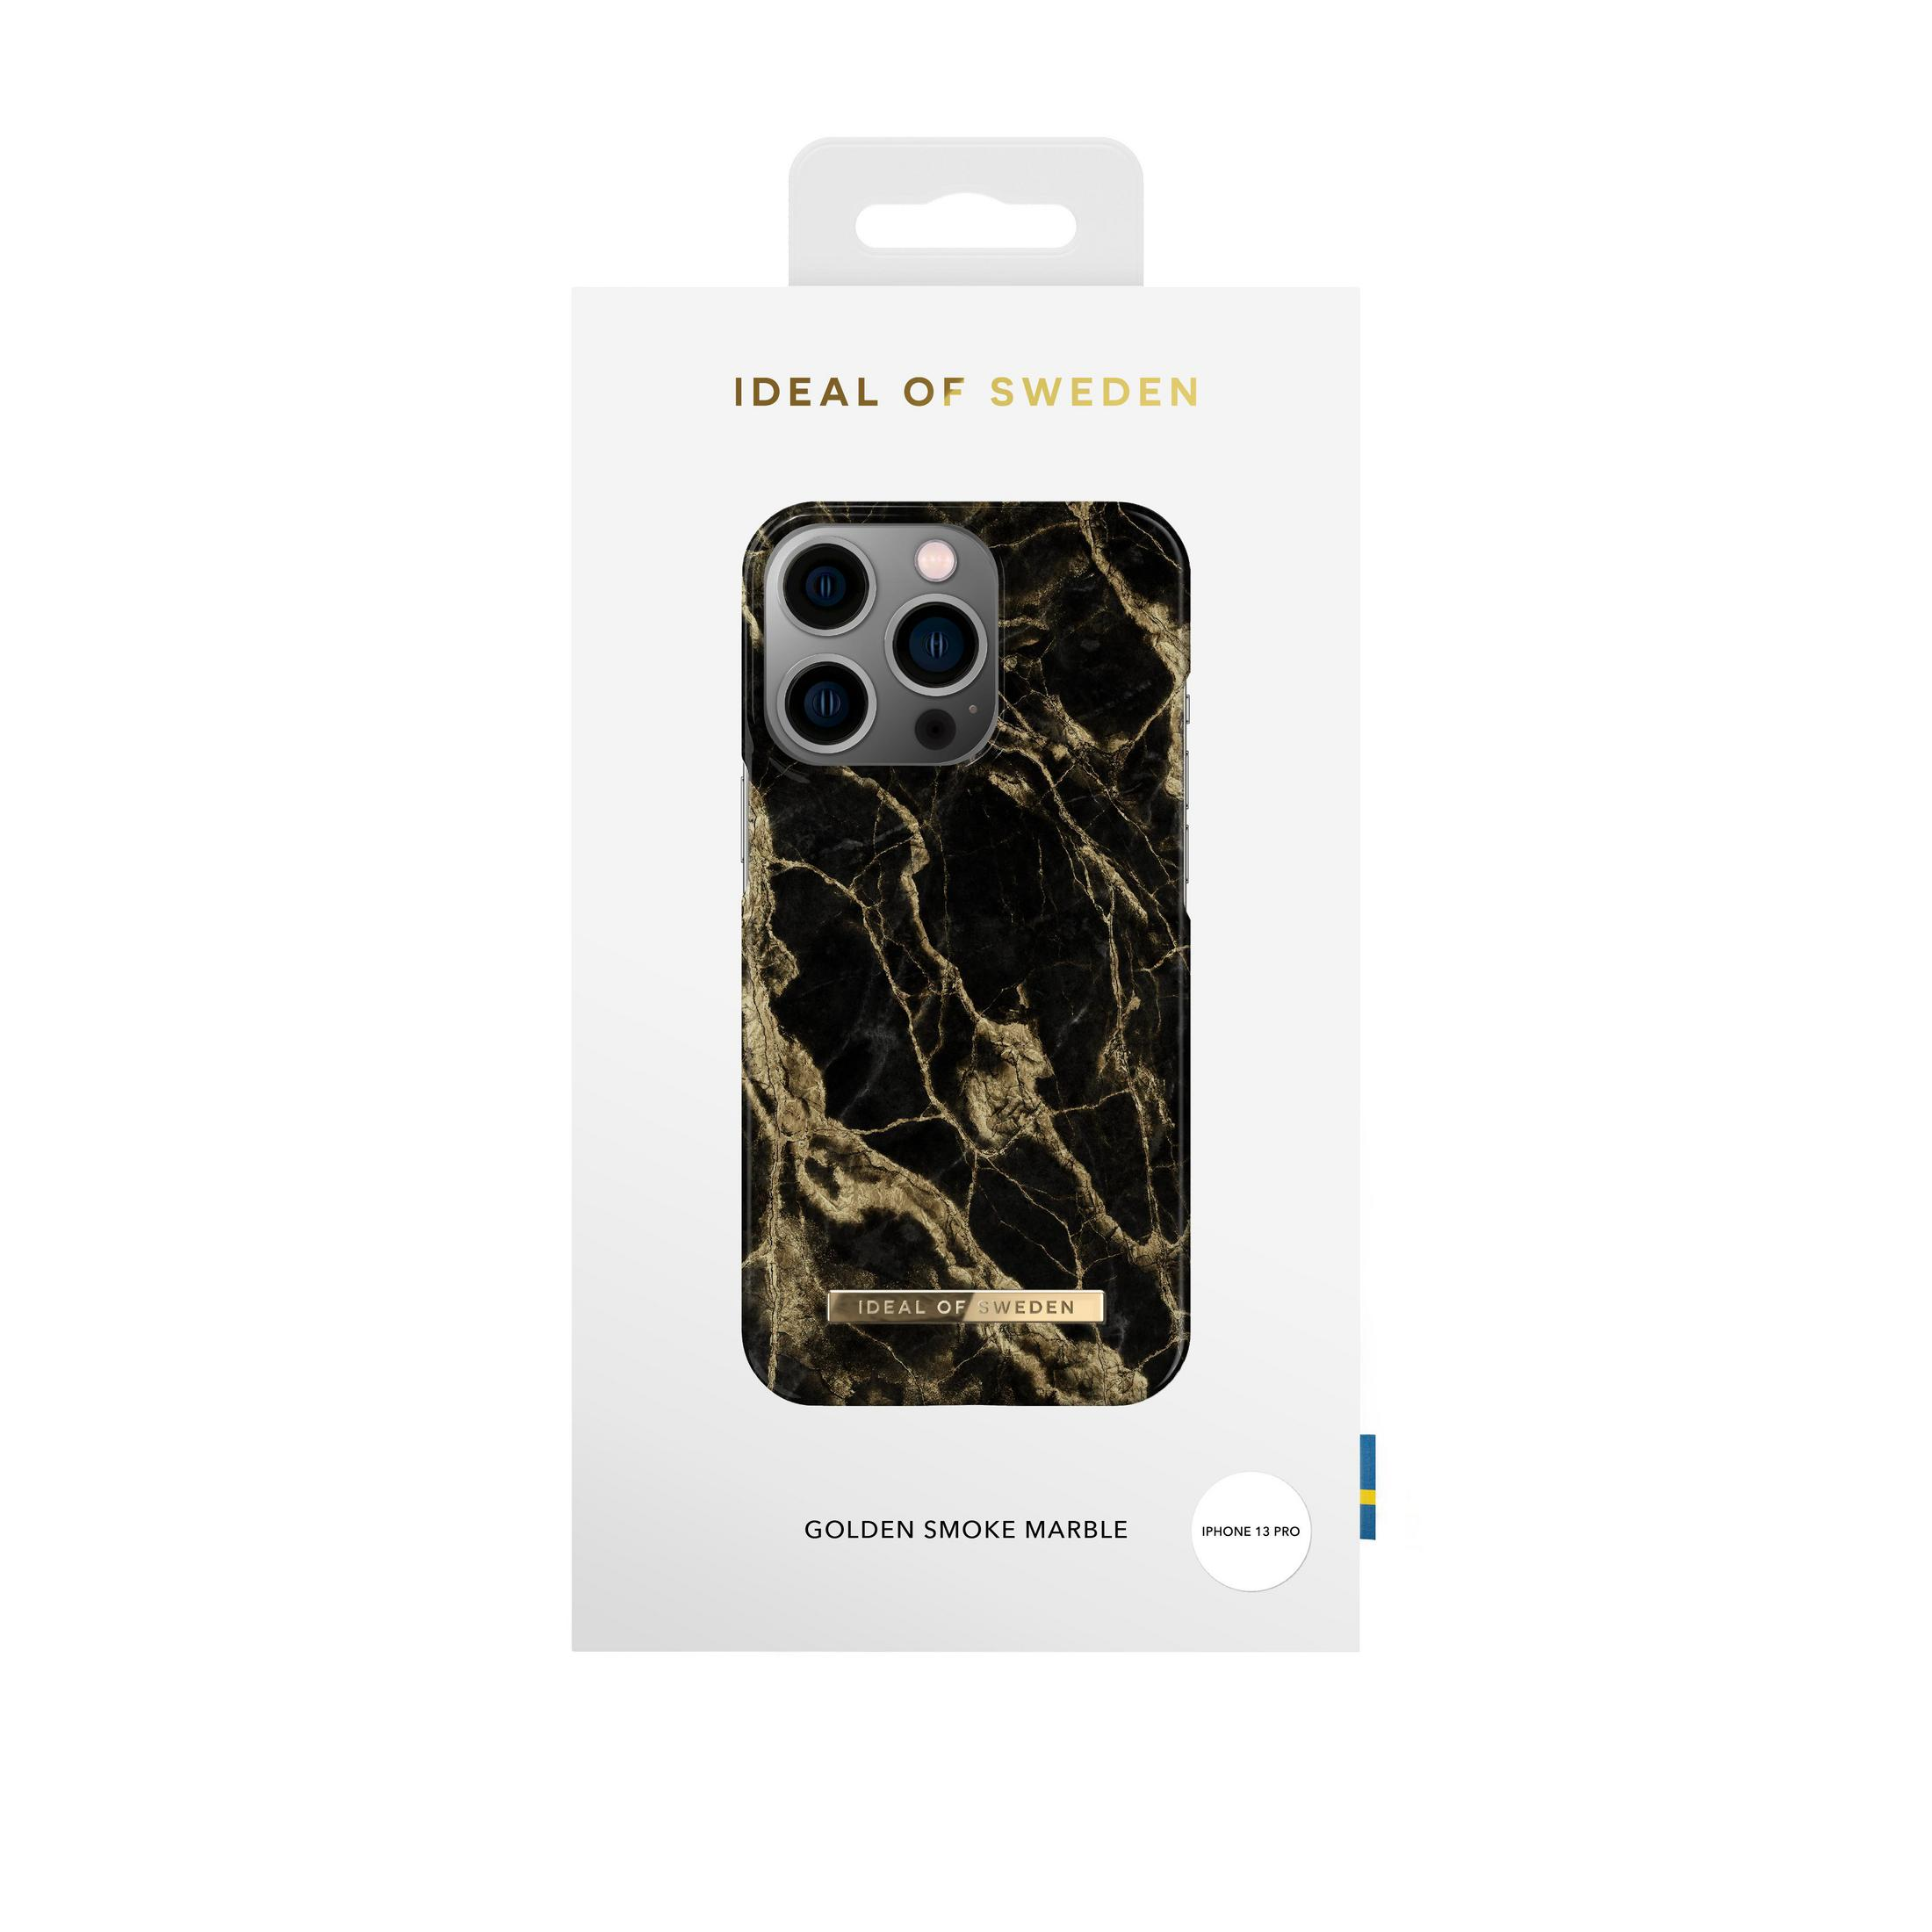 IDEAL Smoke Apple, SWEDEN Golden Pro, Backcover, OF 13 IDFCSS20-I2161P-191, Marble iPhone